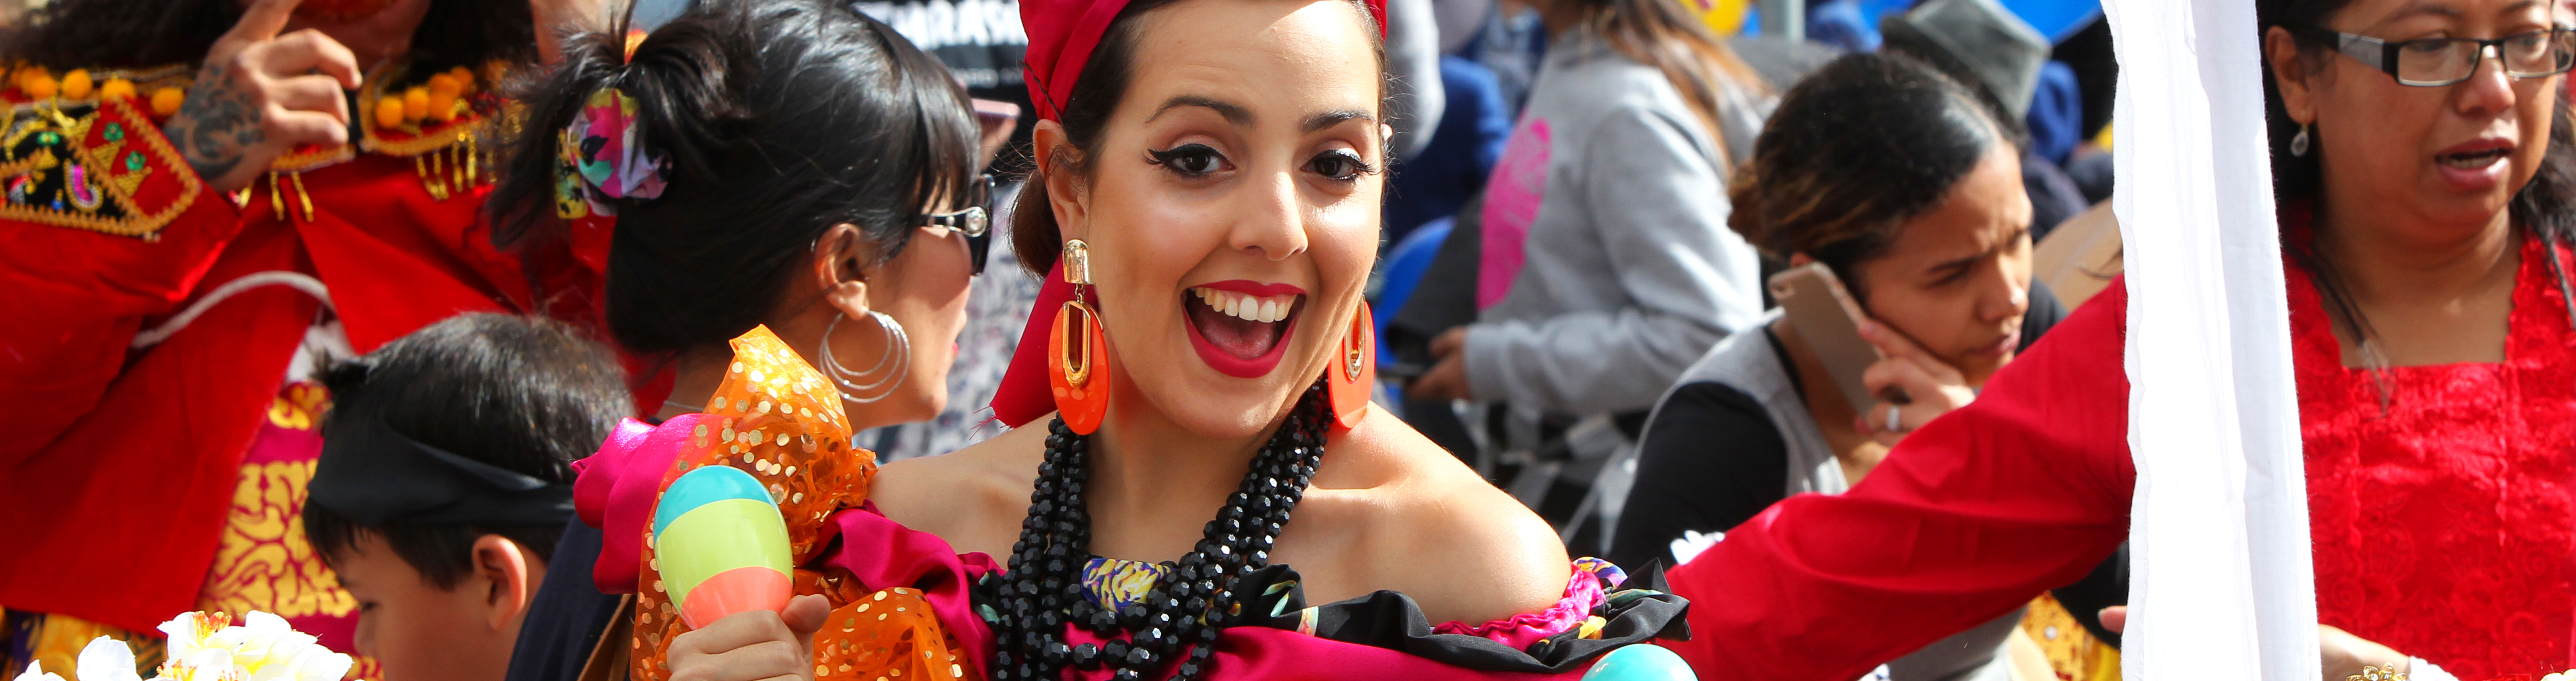 A girl dressed in traditional costume walking in the parade